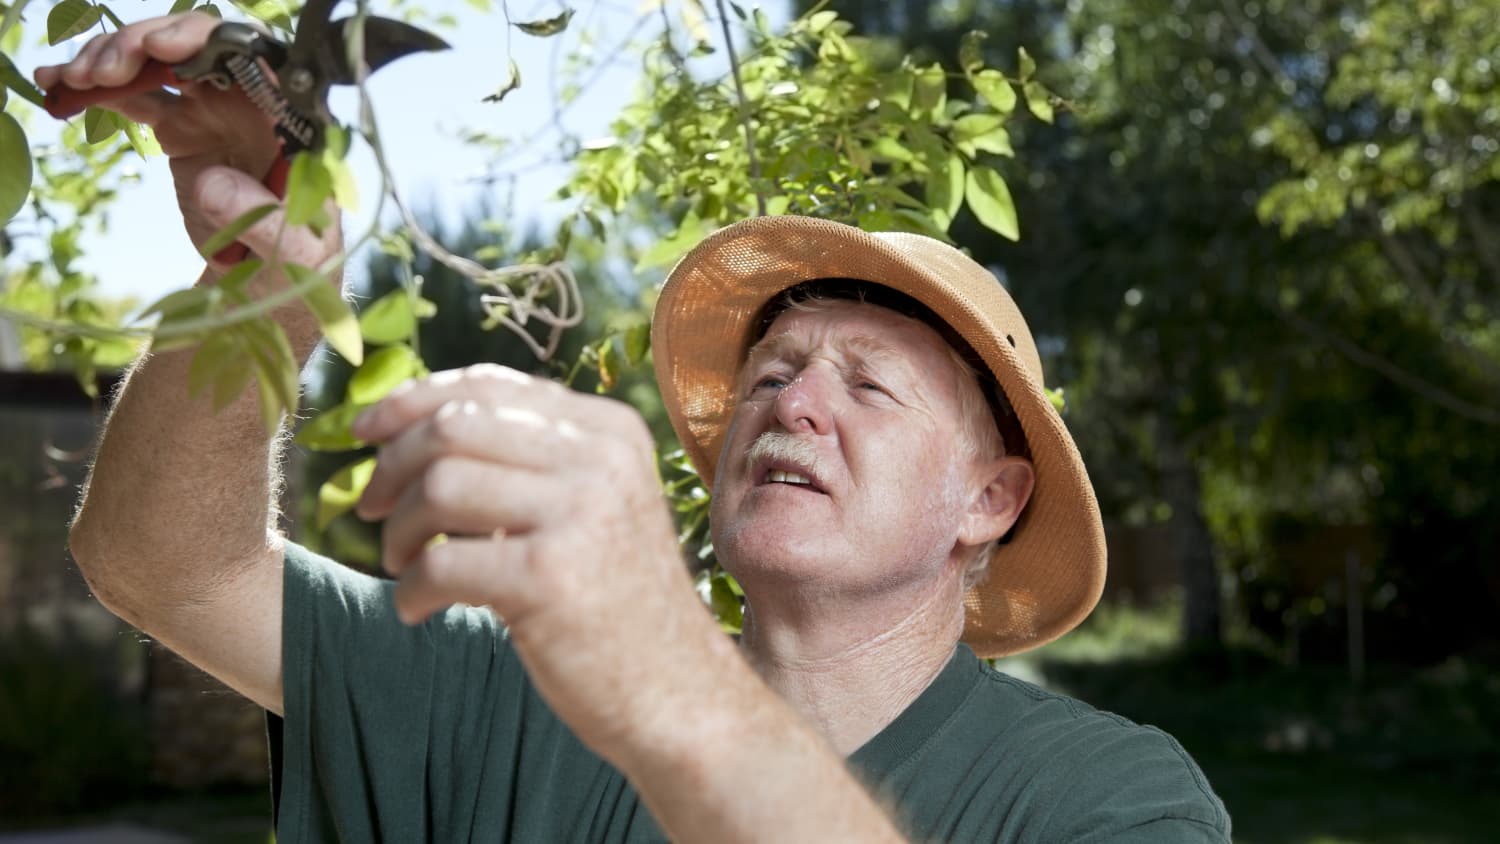 a man wears a hat while gardening to protect himself from basal cell carcinoma